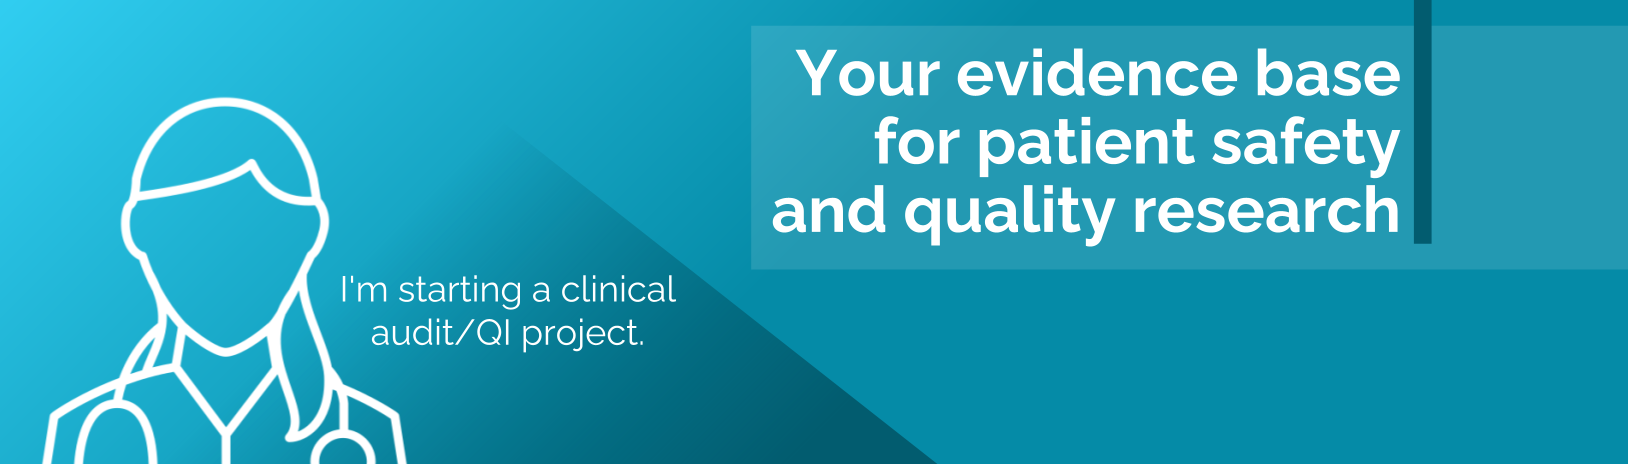 EPOCH is your evidence base for patient safety and quality care